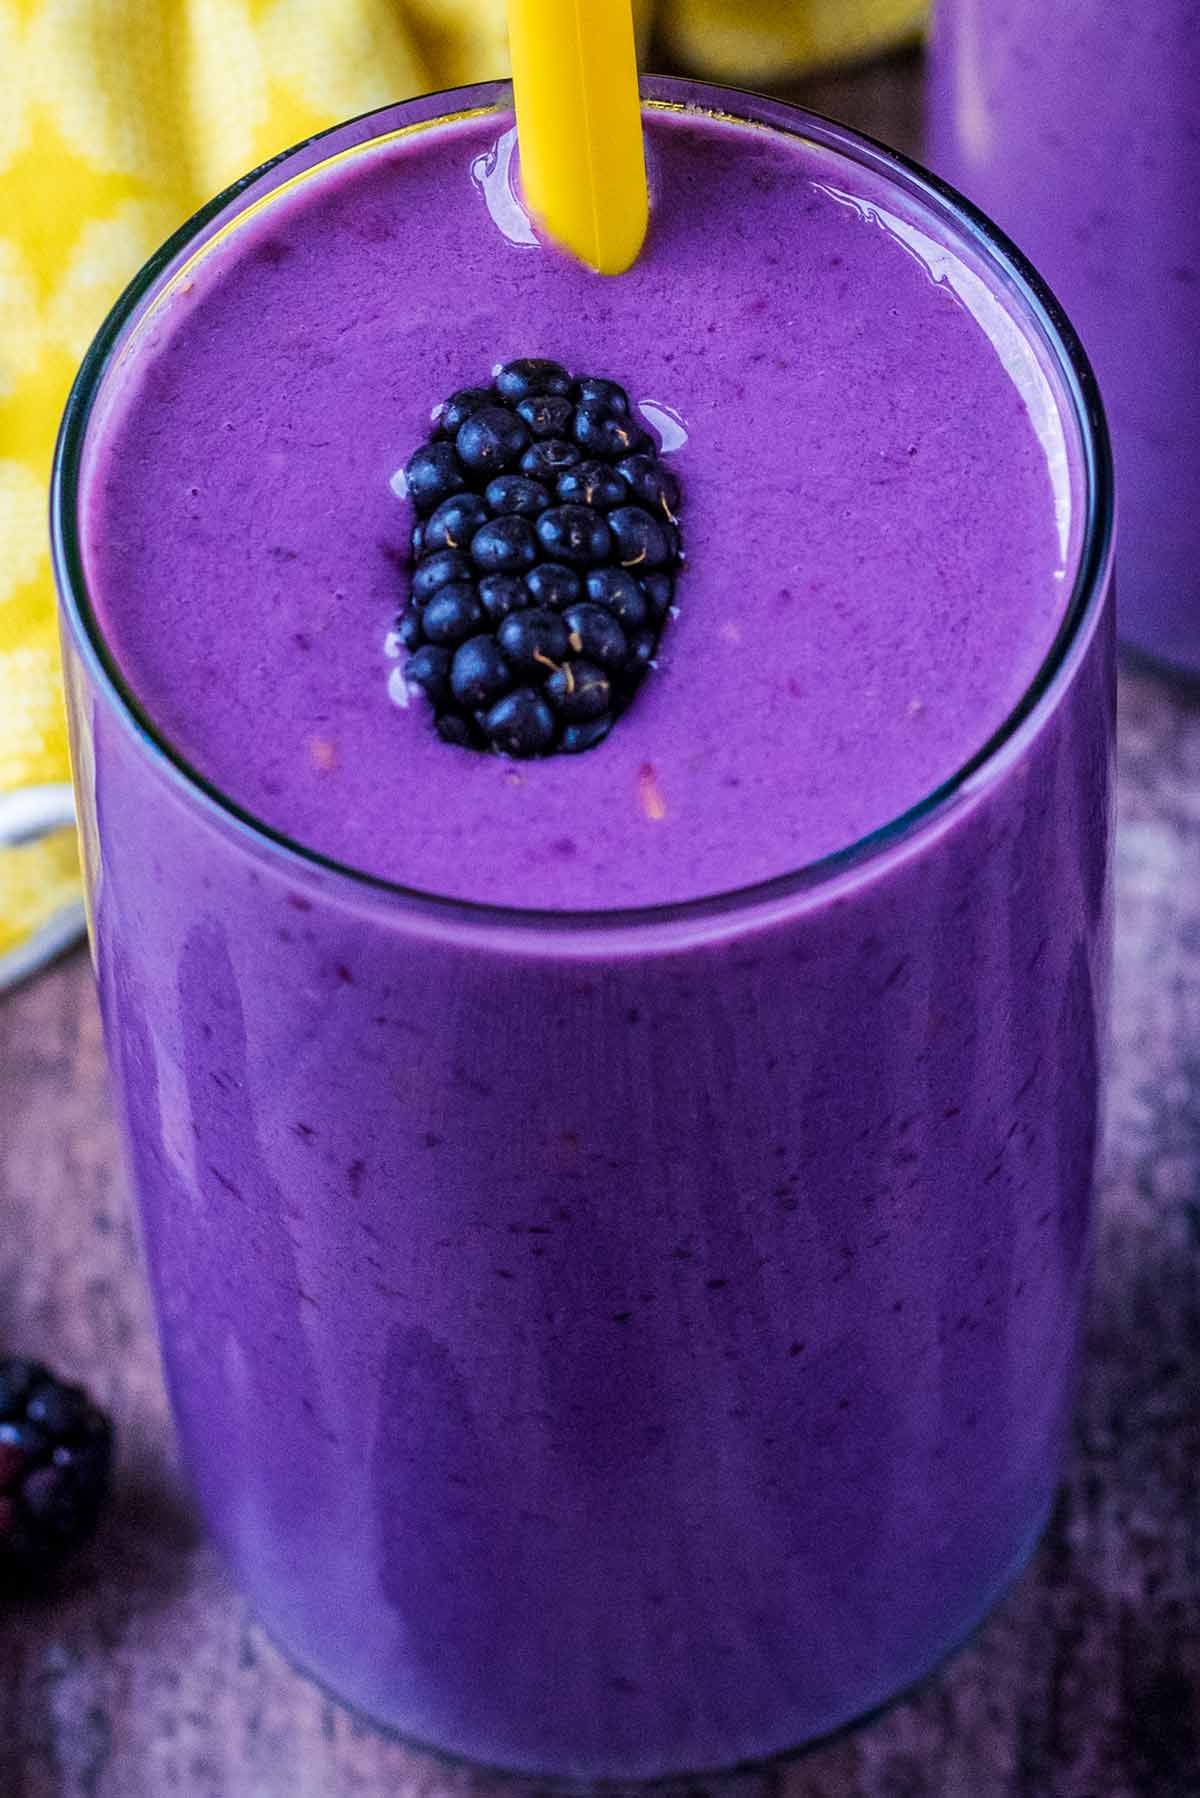 A blackberry floating on top of a purple smoothie.